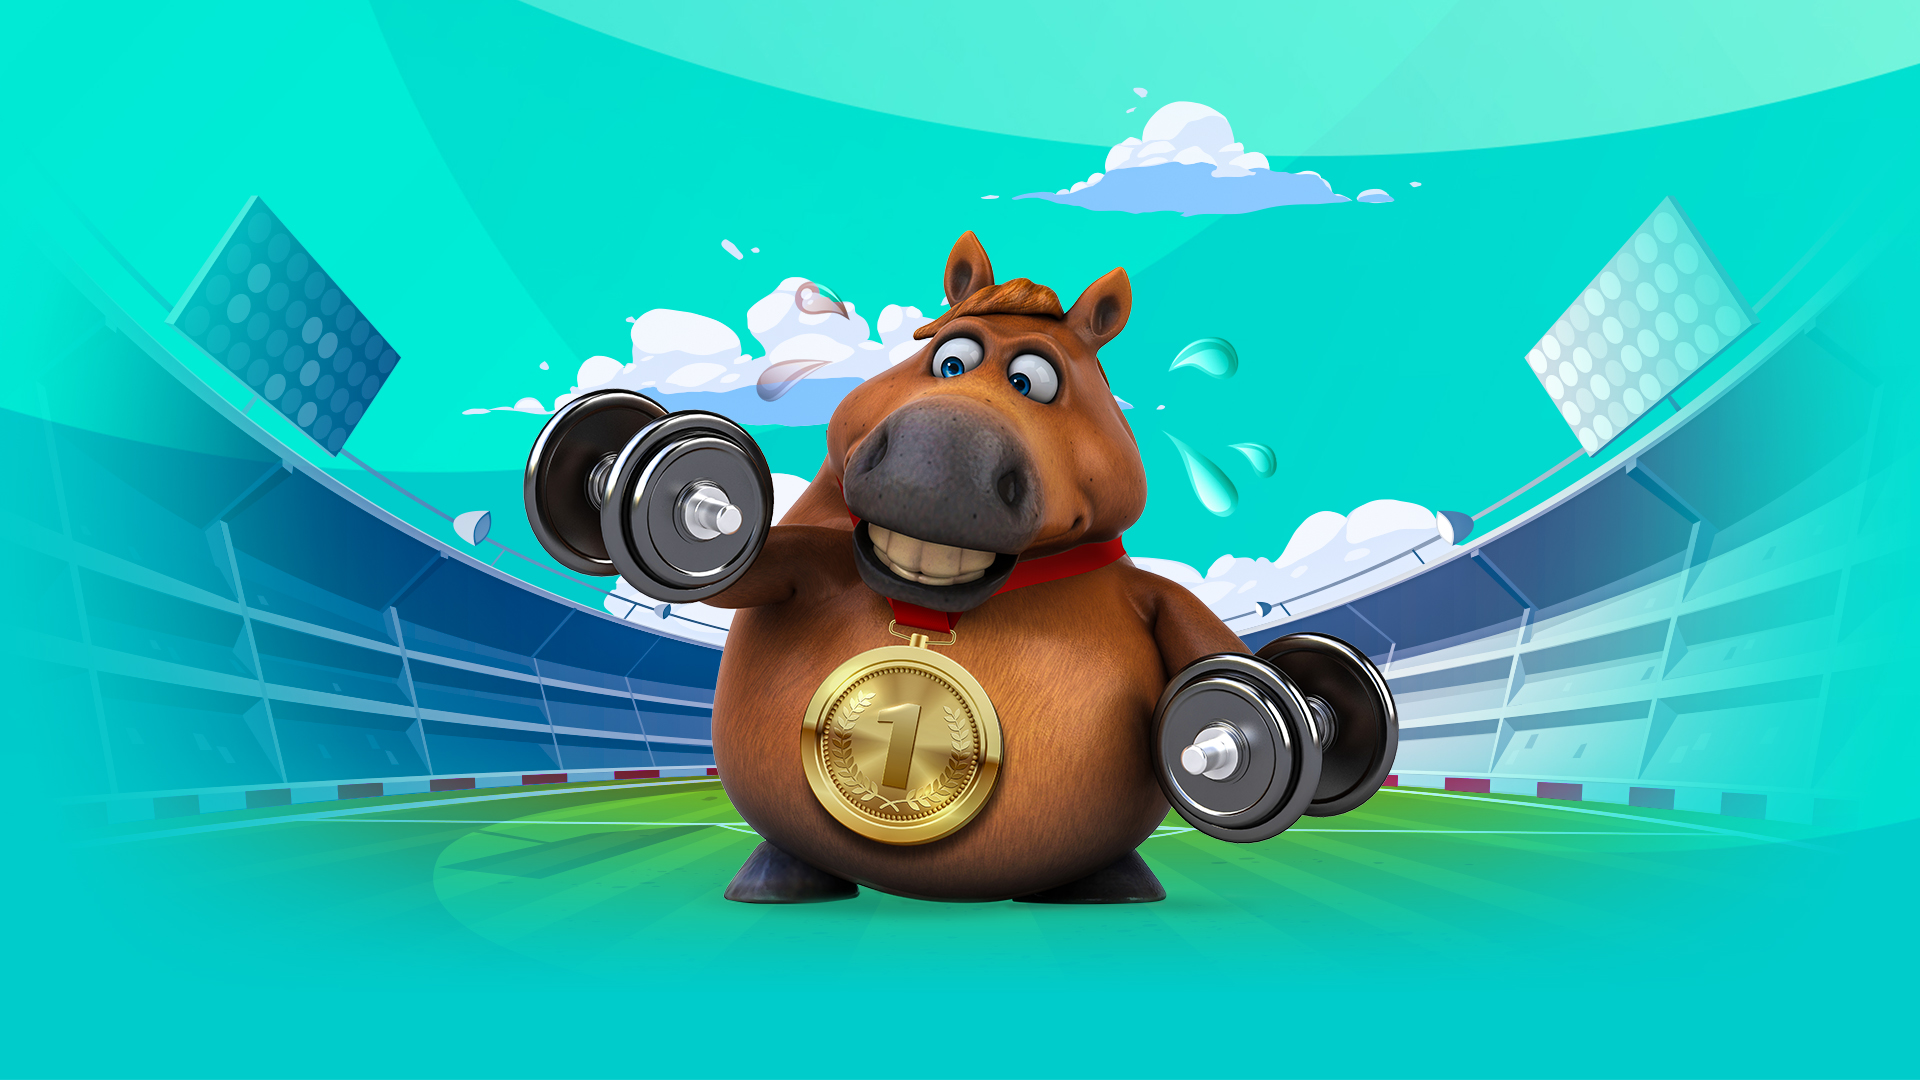 A 3D cartoon horse stands inside an Olympic stadium; he holds two dumbbells, one in each hand, and wears a gold medal around his neck.